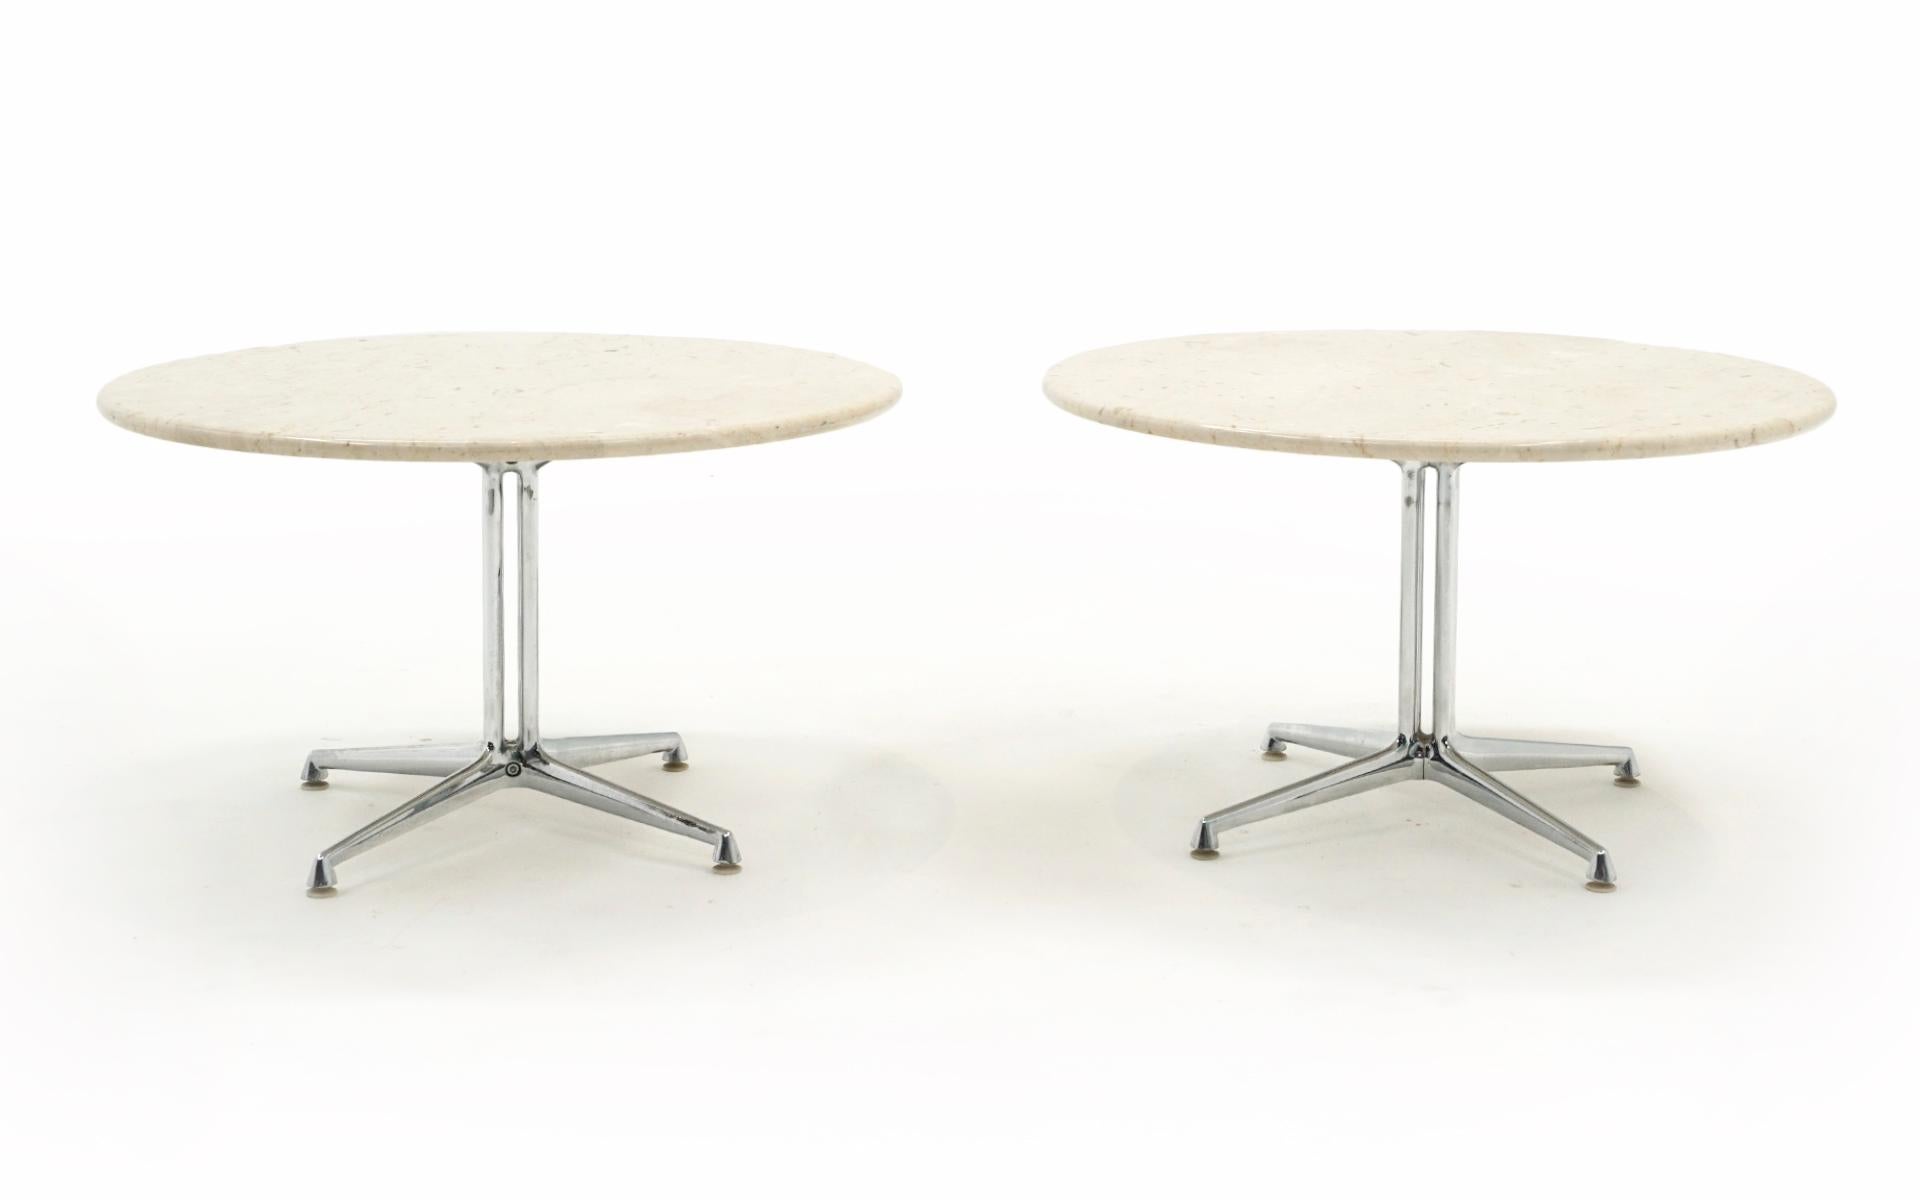 Matching pair of La Fonda tables designed by Charles and Ray Eames for Alexander Girard's La Fonda restaurant interior. These two tables have been together in a cooperate office since they were new in the 1970s. Both show very few if any signs of